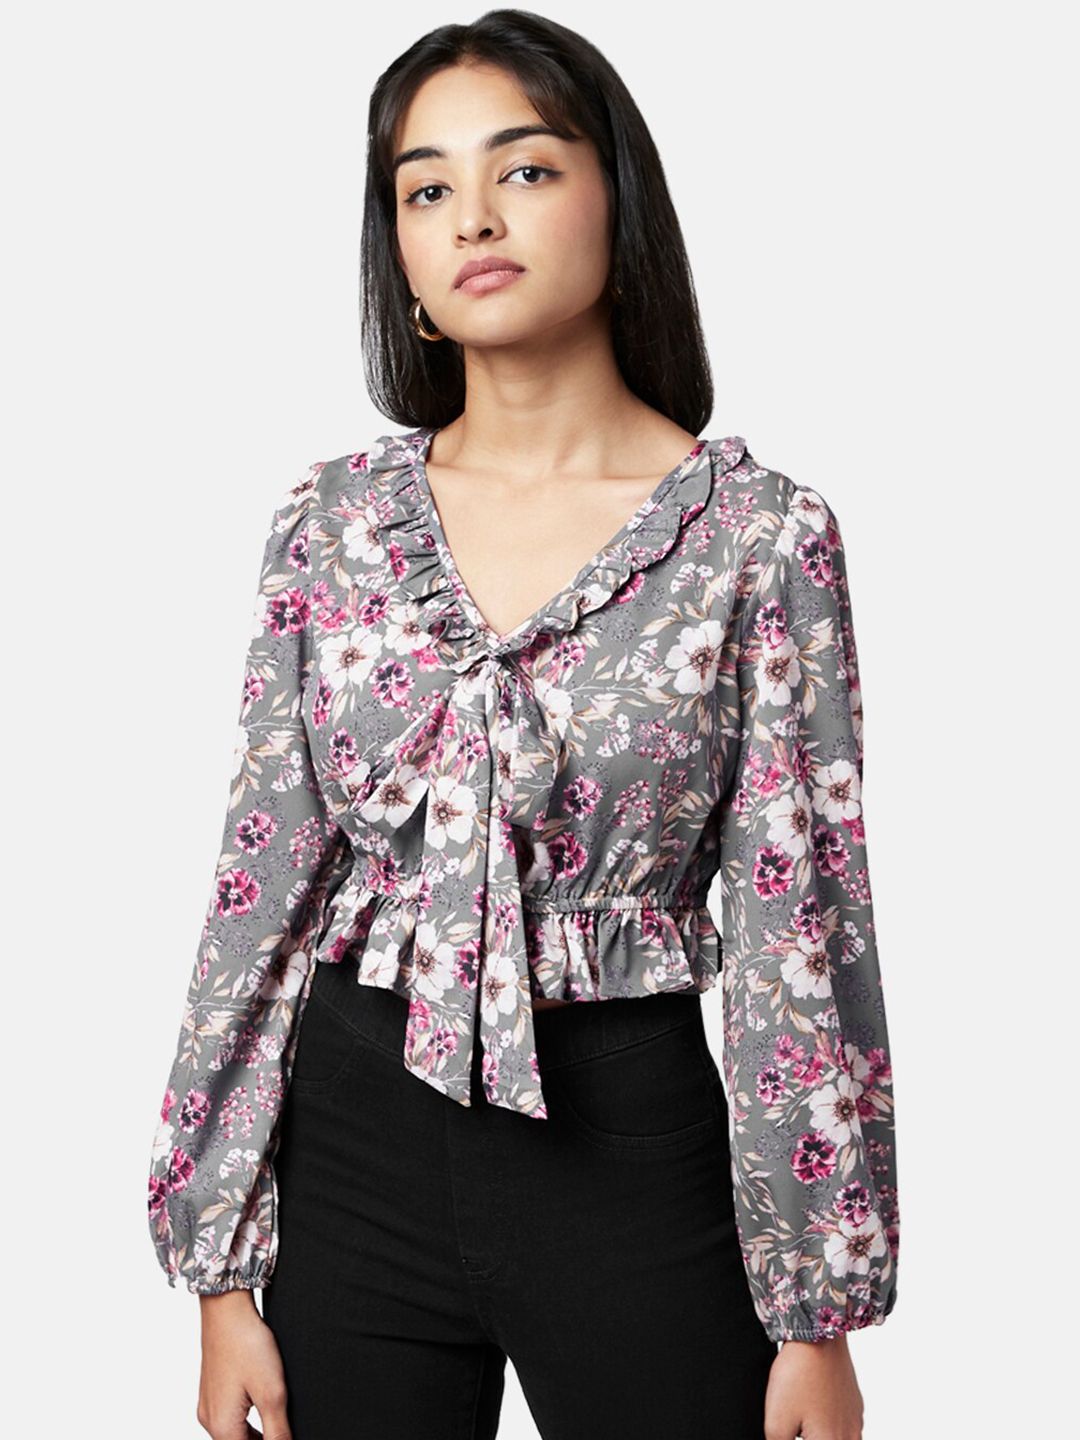 YU by Pantaloons Women Grey & Pink Floral Print Tie-Up Neck Top Price in India